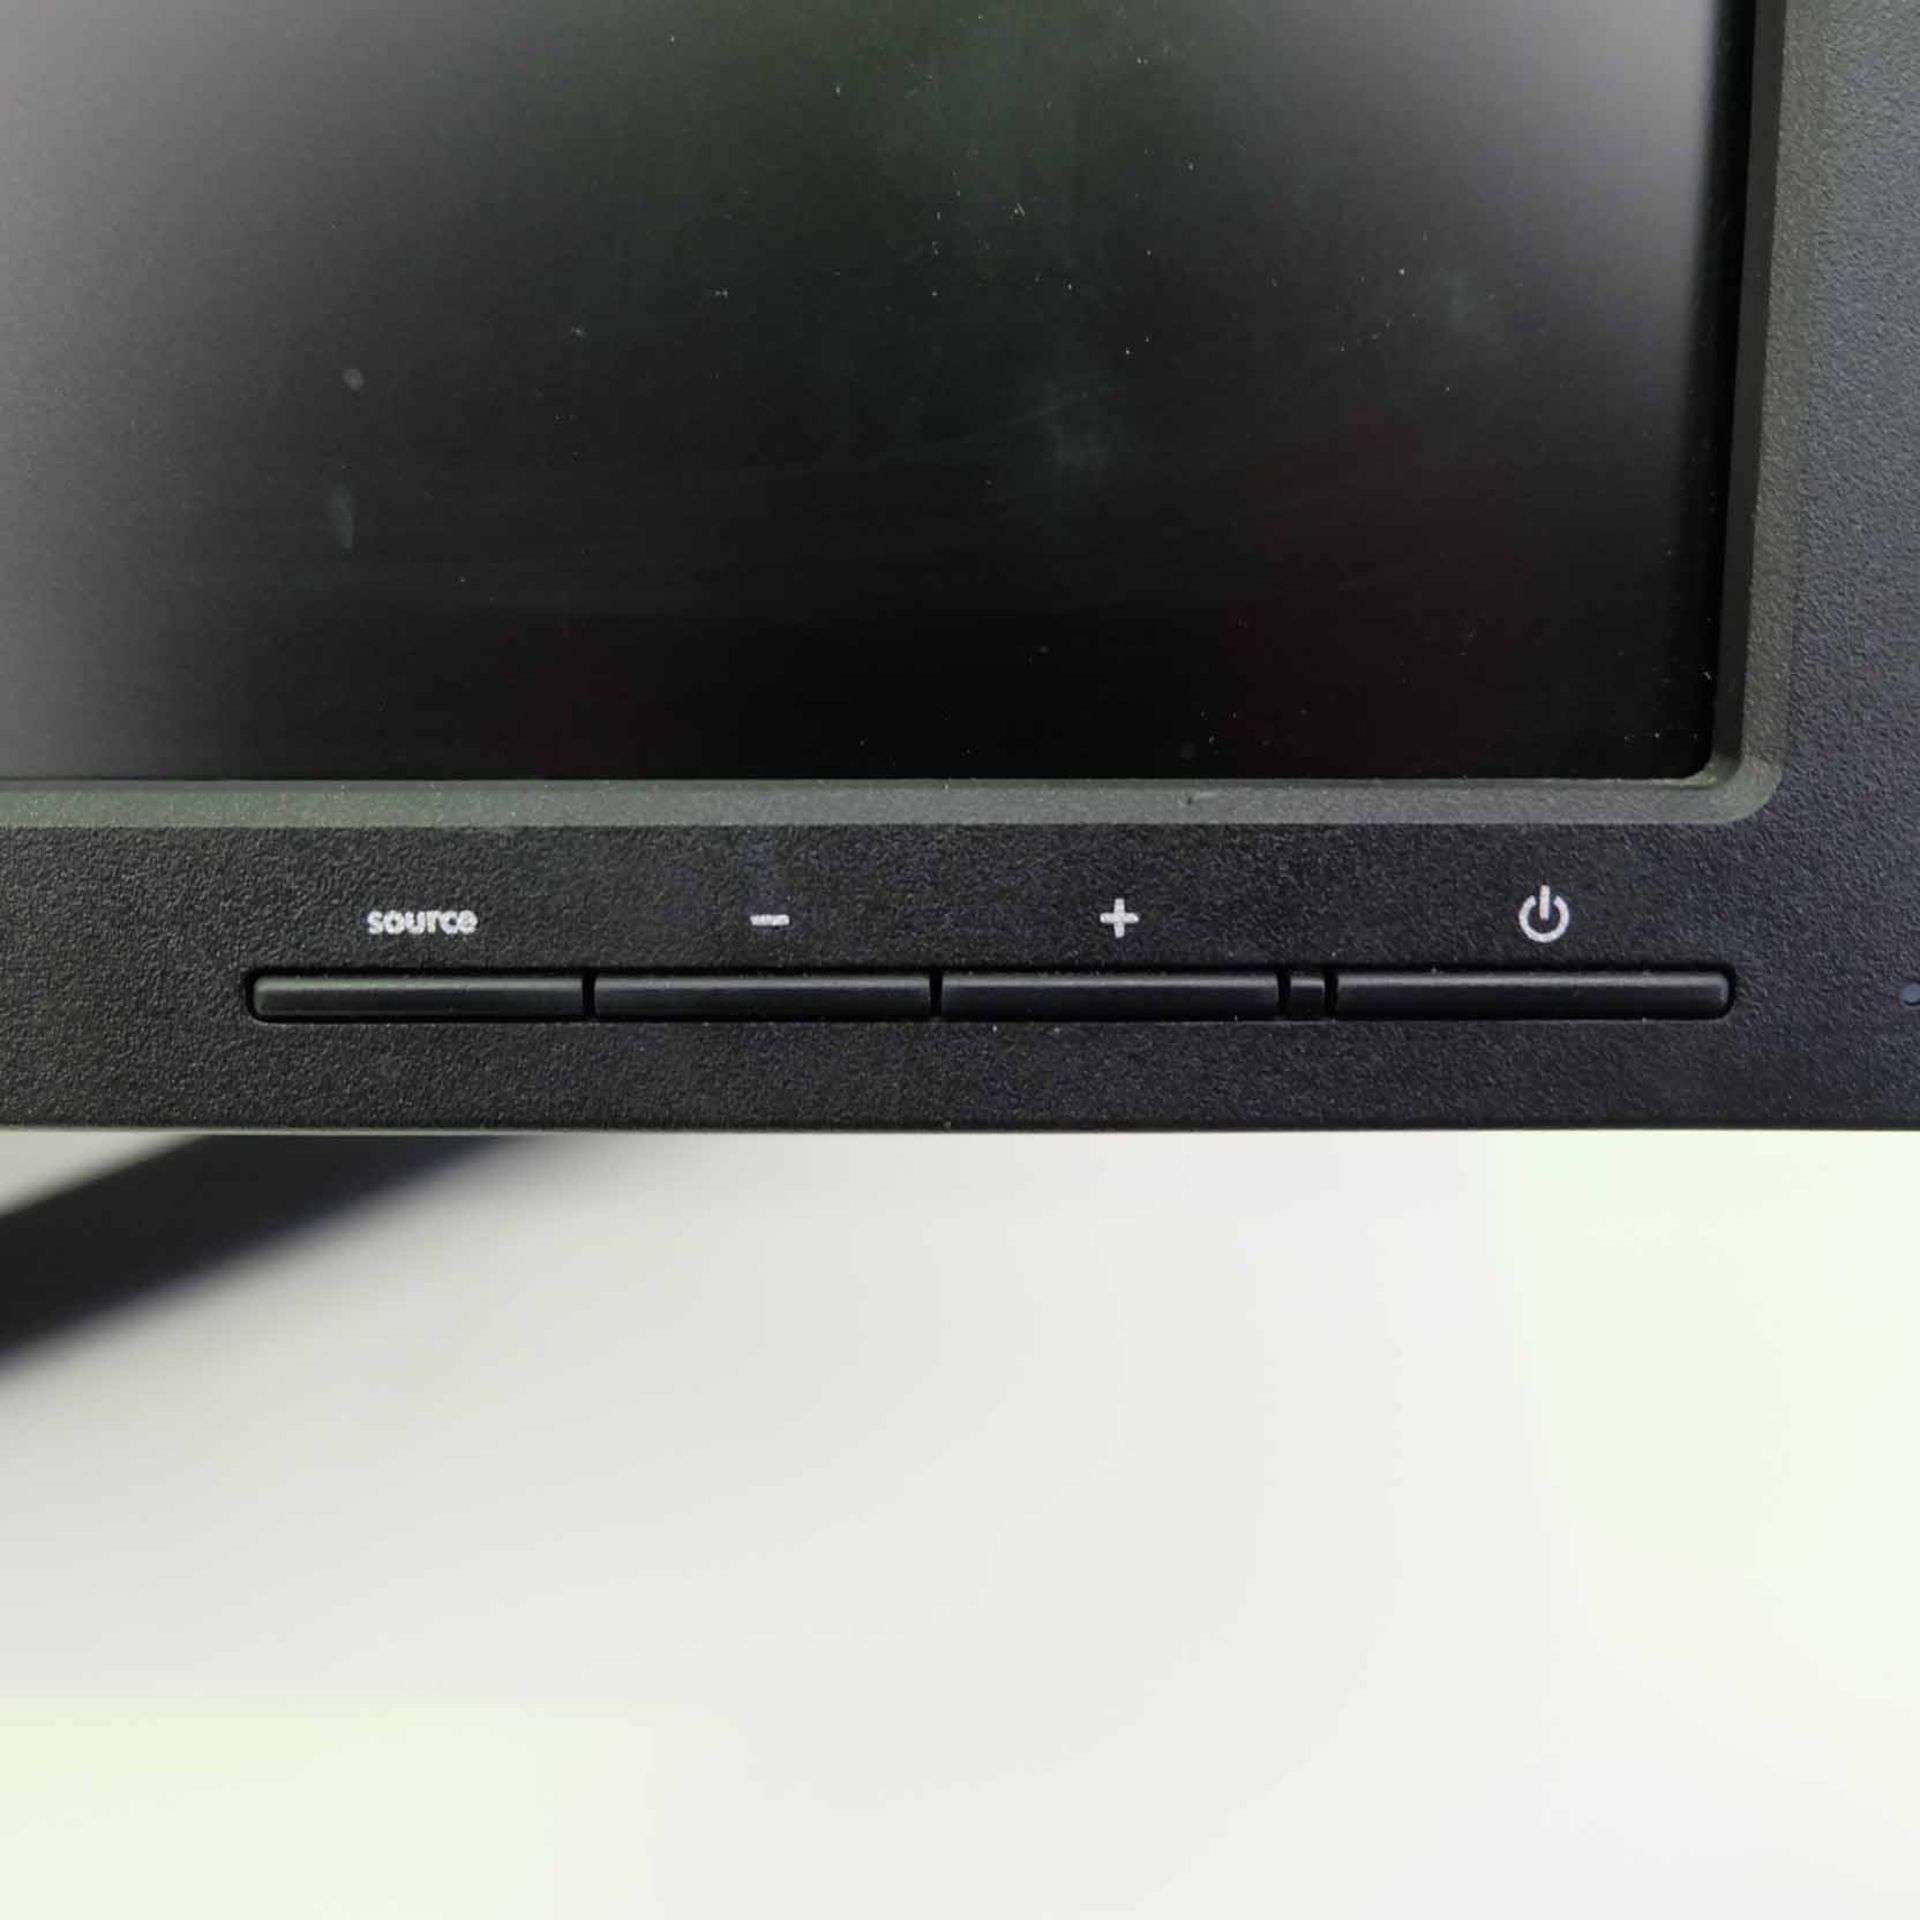 HP Model HPZR30W LCD Computer Monitor. Size 30". Tilting and Swivelling. - Image 6 of 10